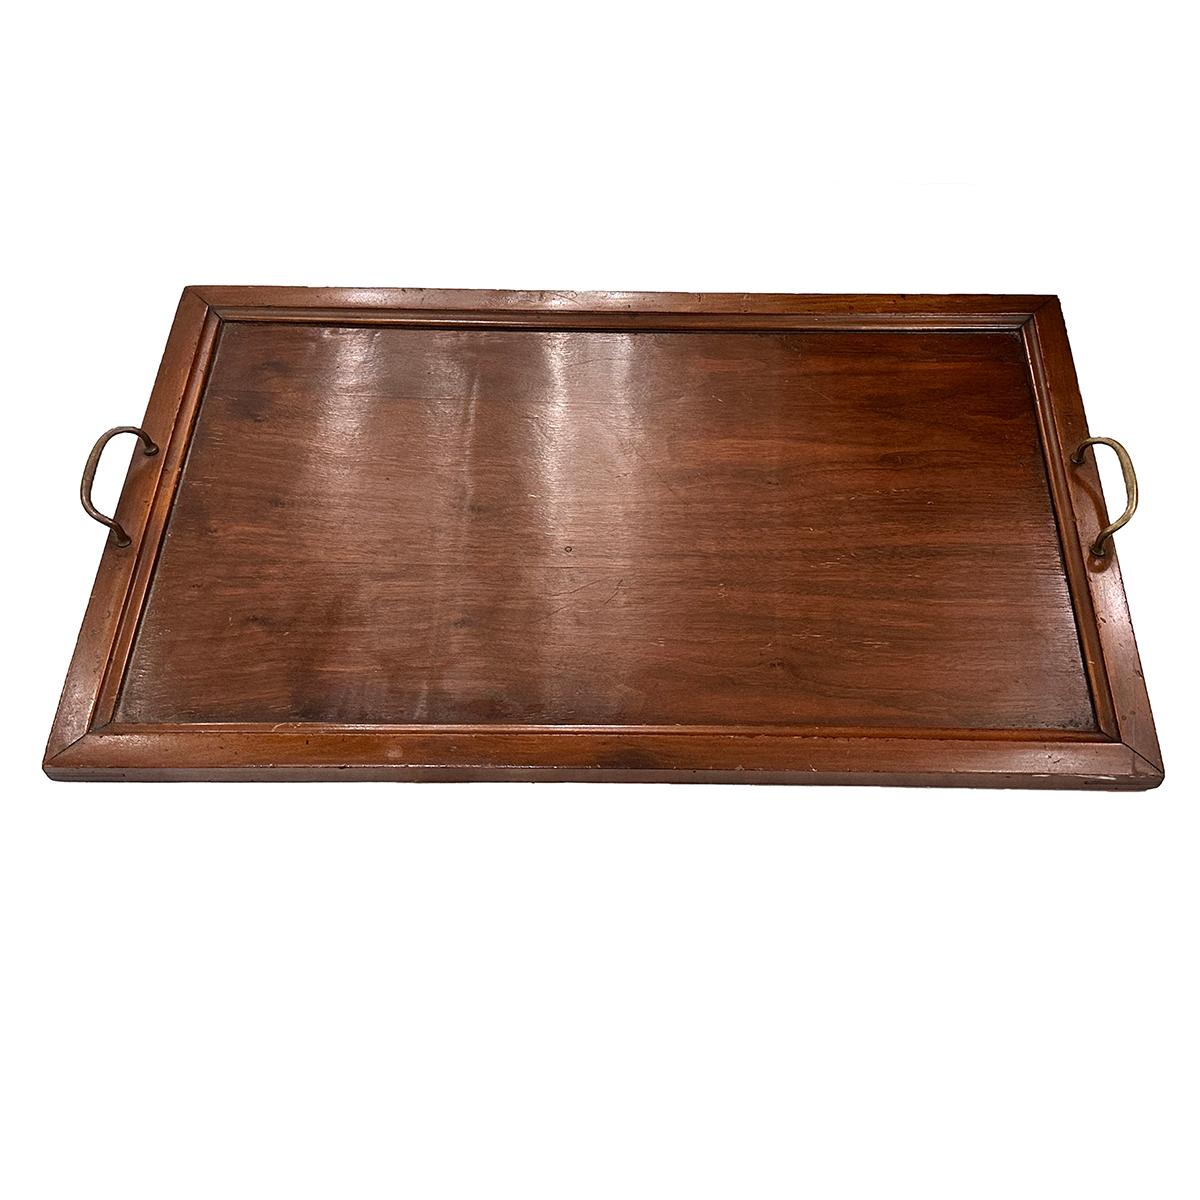 Hand-Carved Vintage English Serving Tray